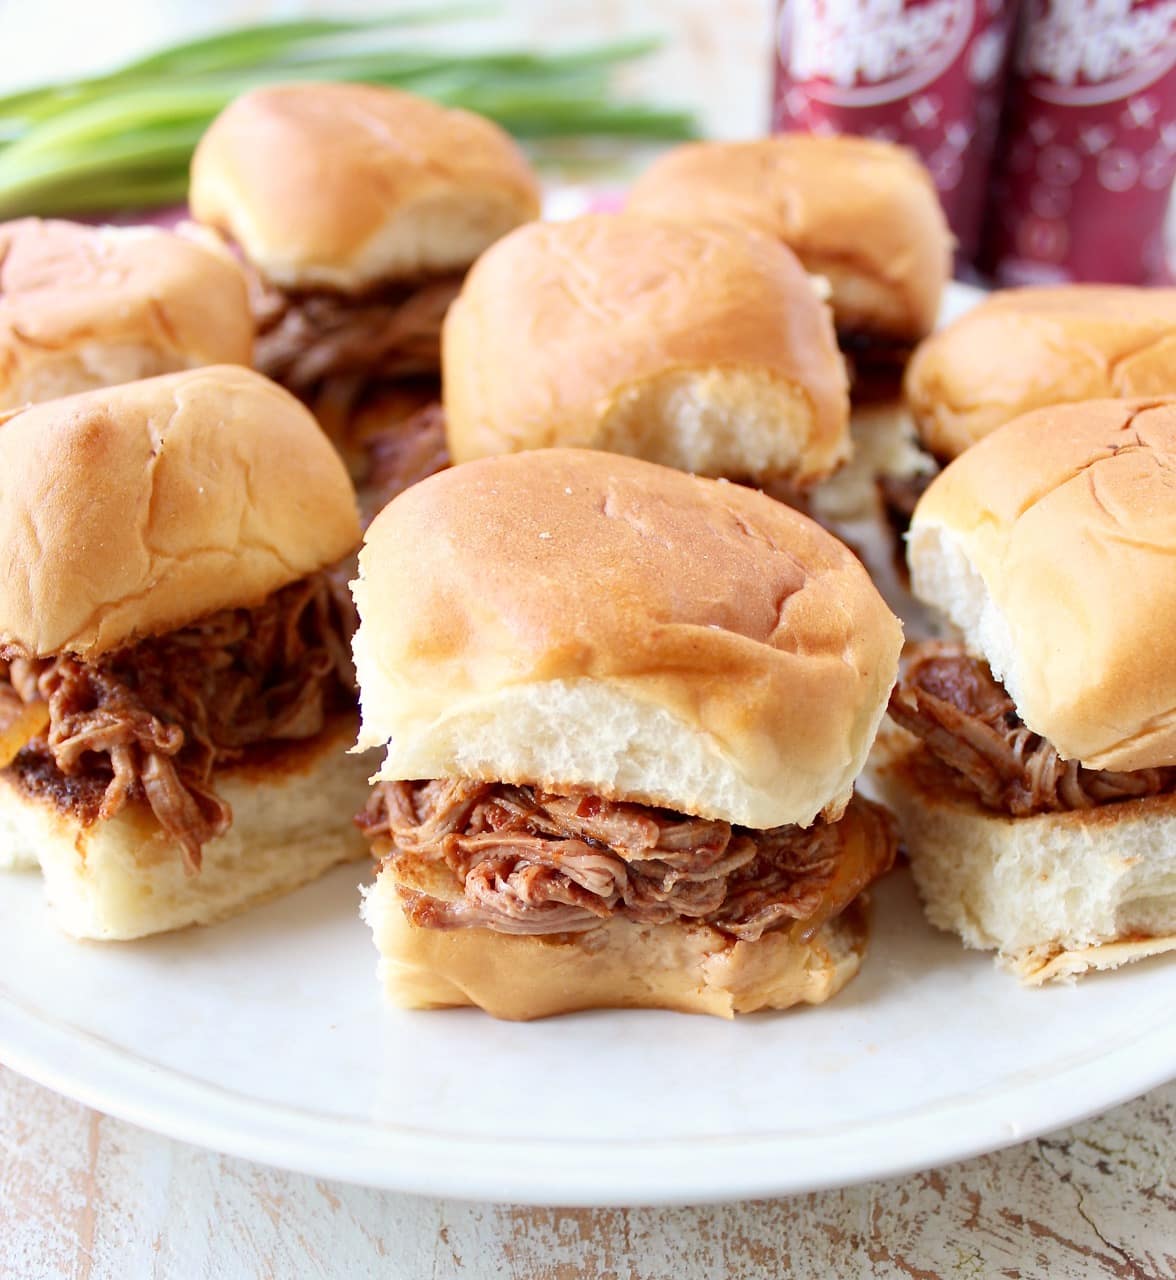 Hawaiian rolls filled with shredded dr pepper pork on a white plate.